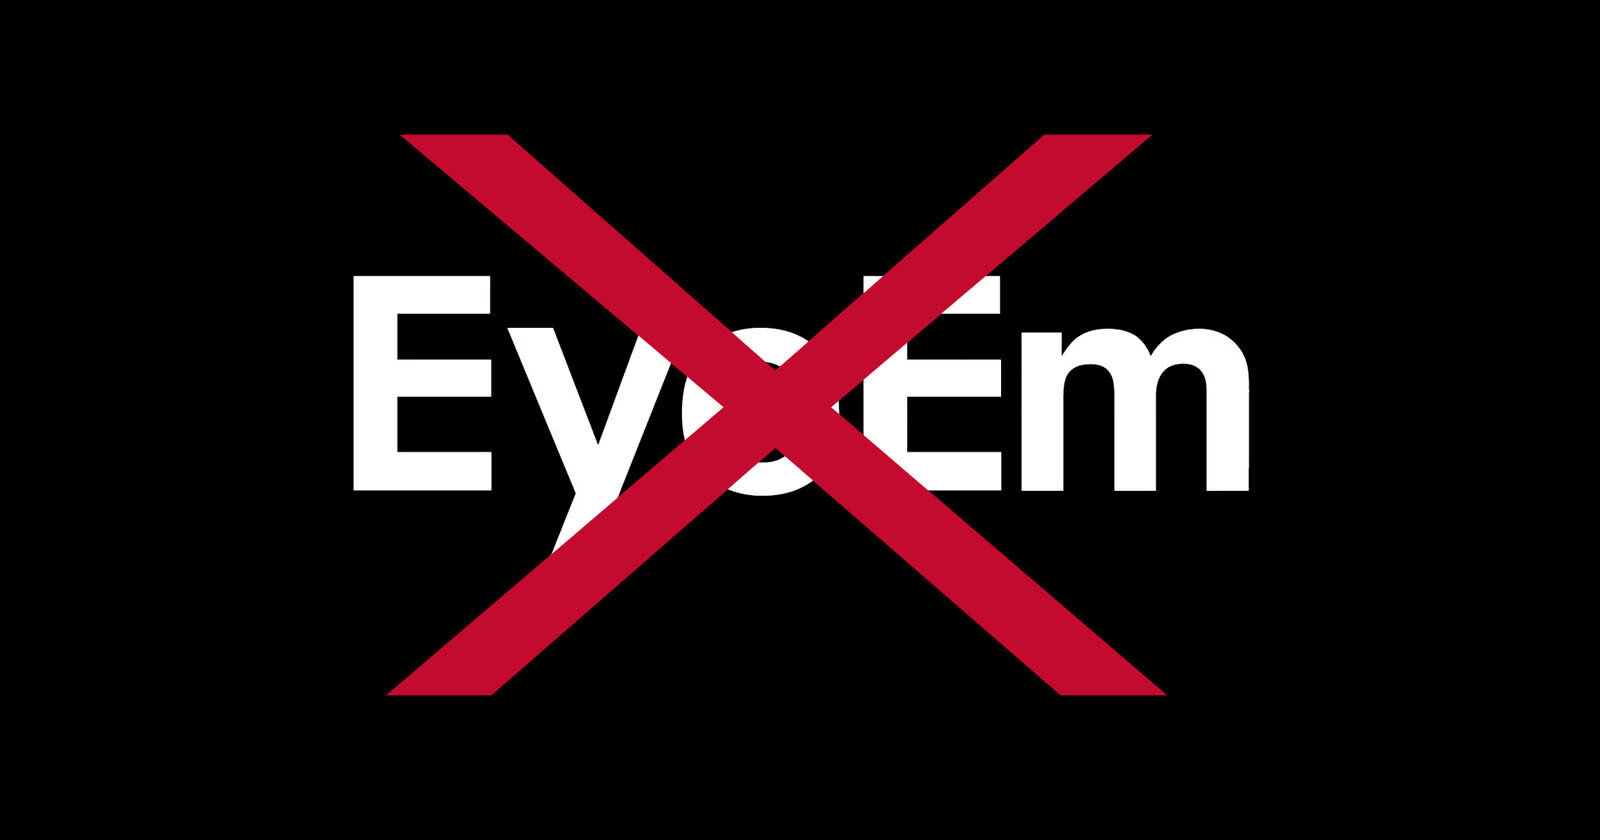 EyeEm Has Filed for Bankruptcy